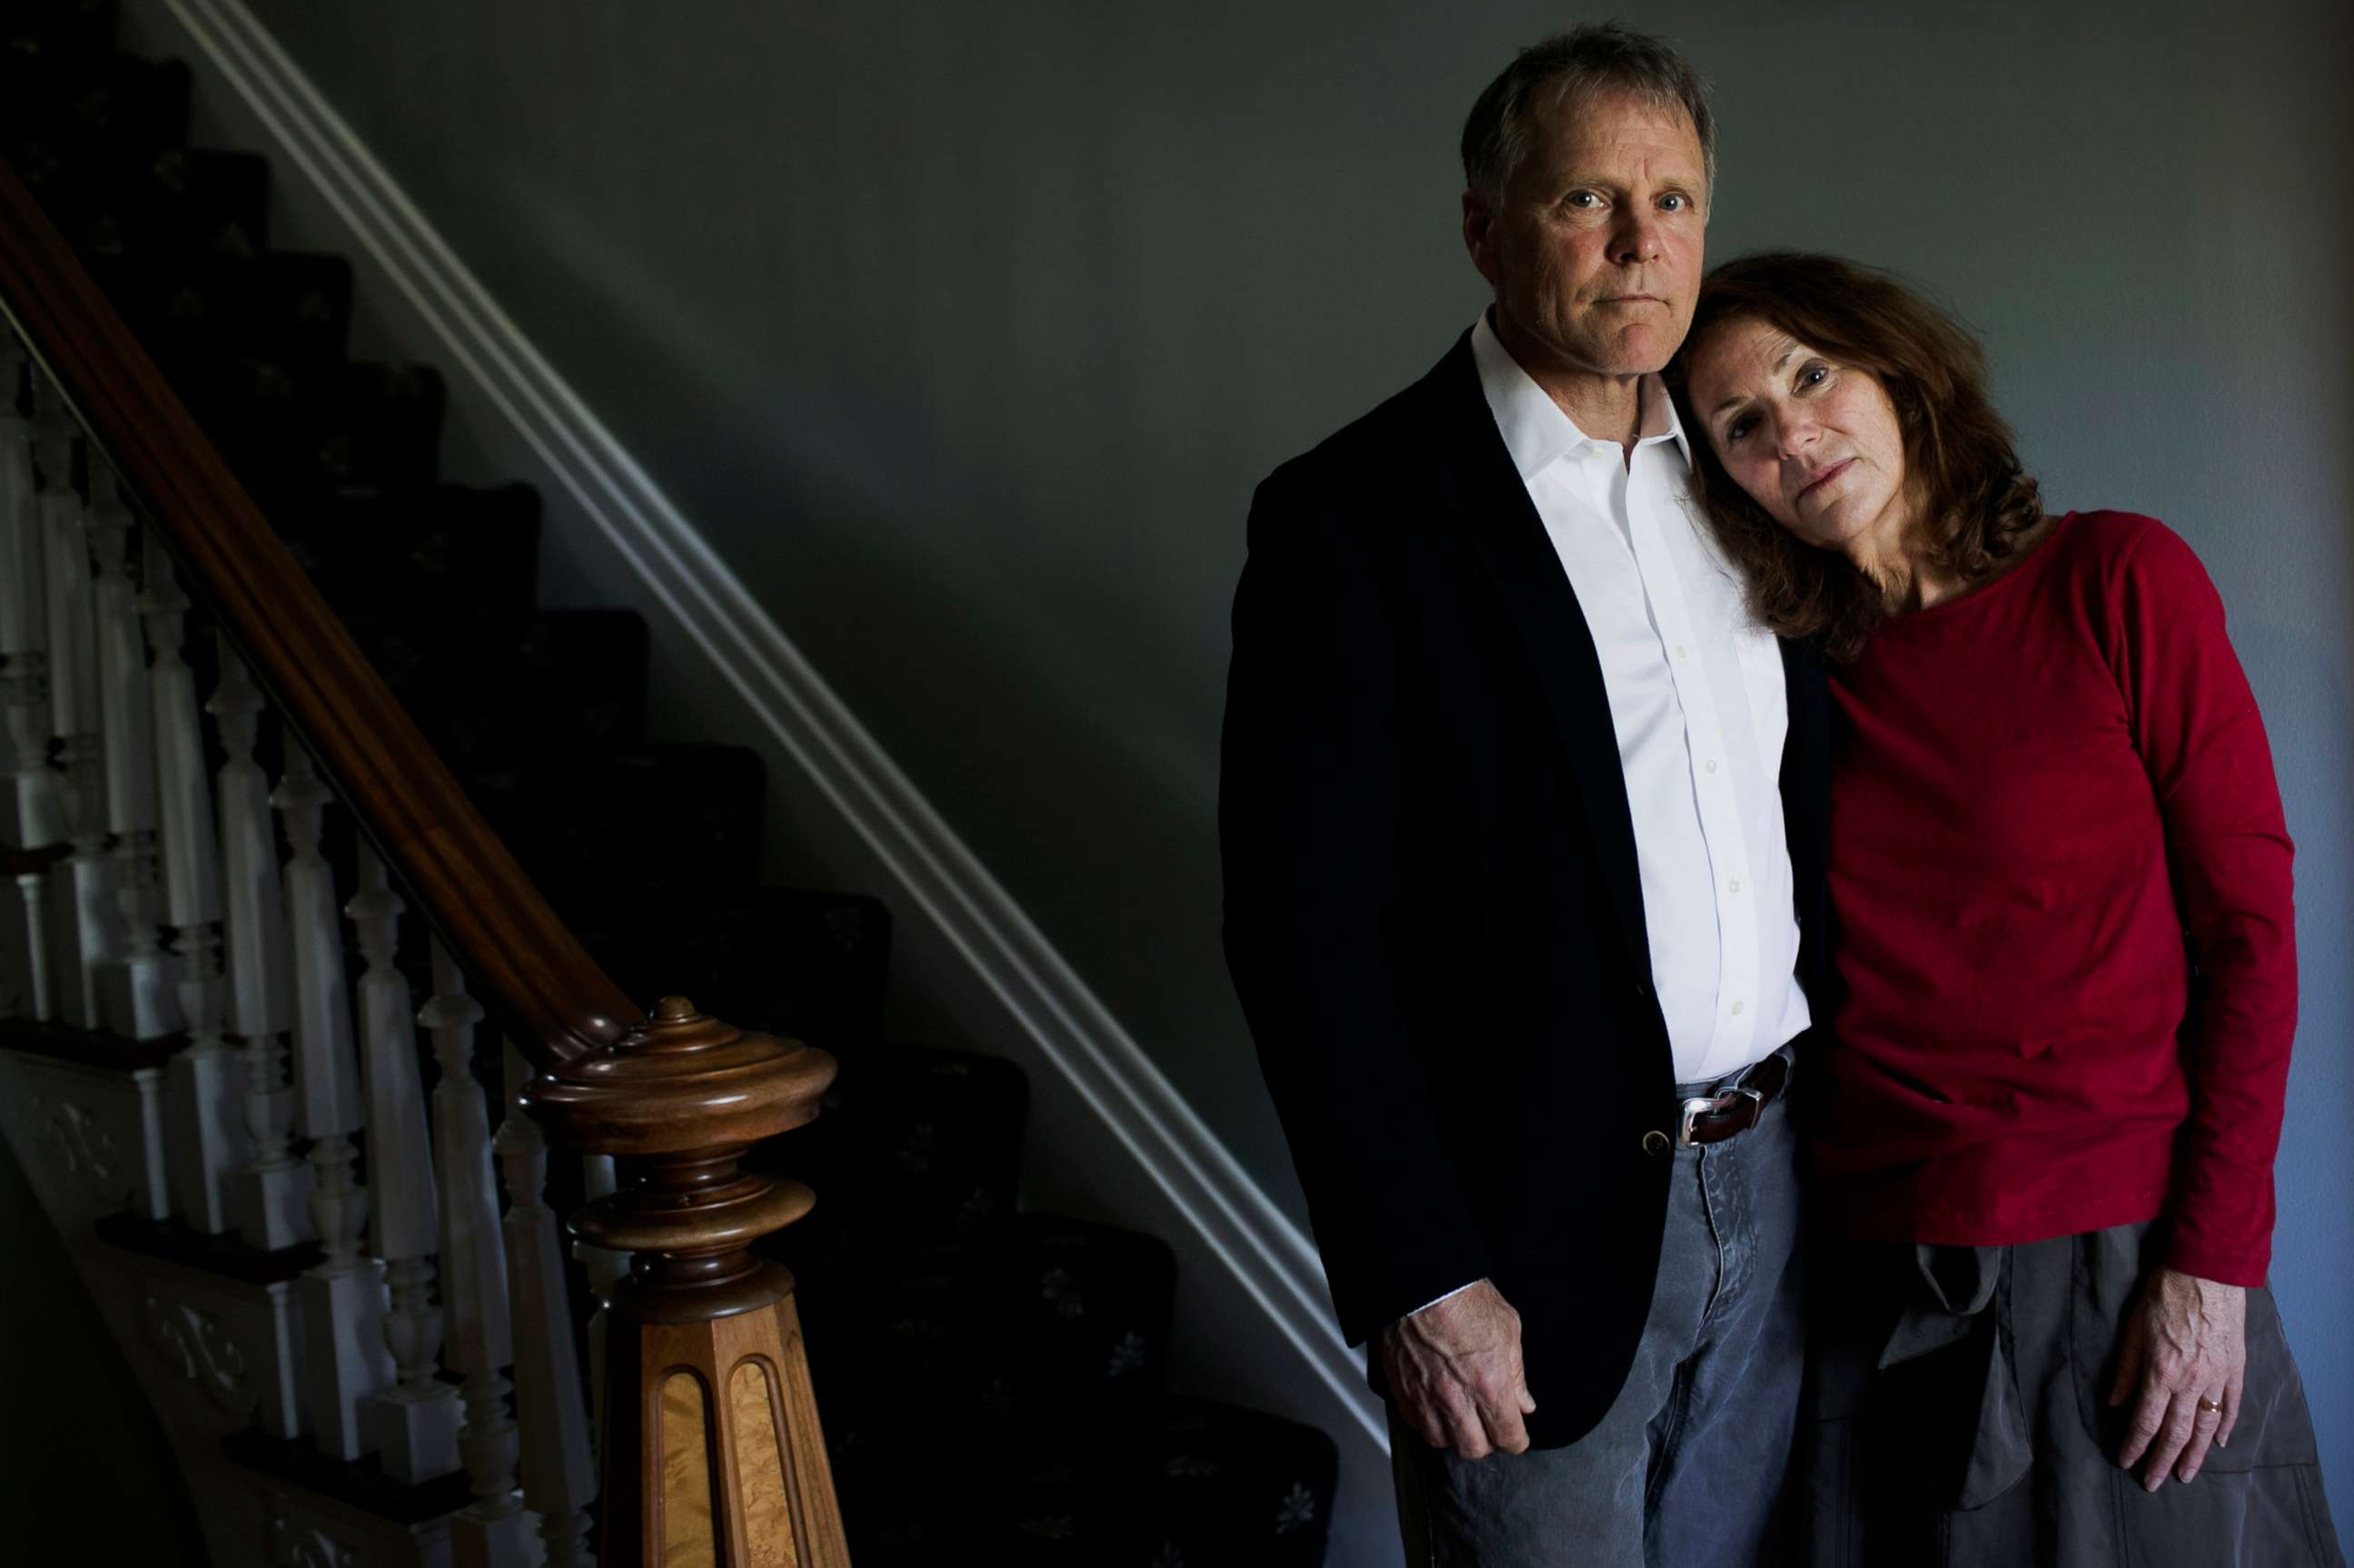 PHOTO: In this April 26, 2017, file photo, Fred and Cindy Warmbier are shown at their home in Wyoming, Ohio.